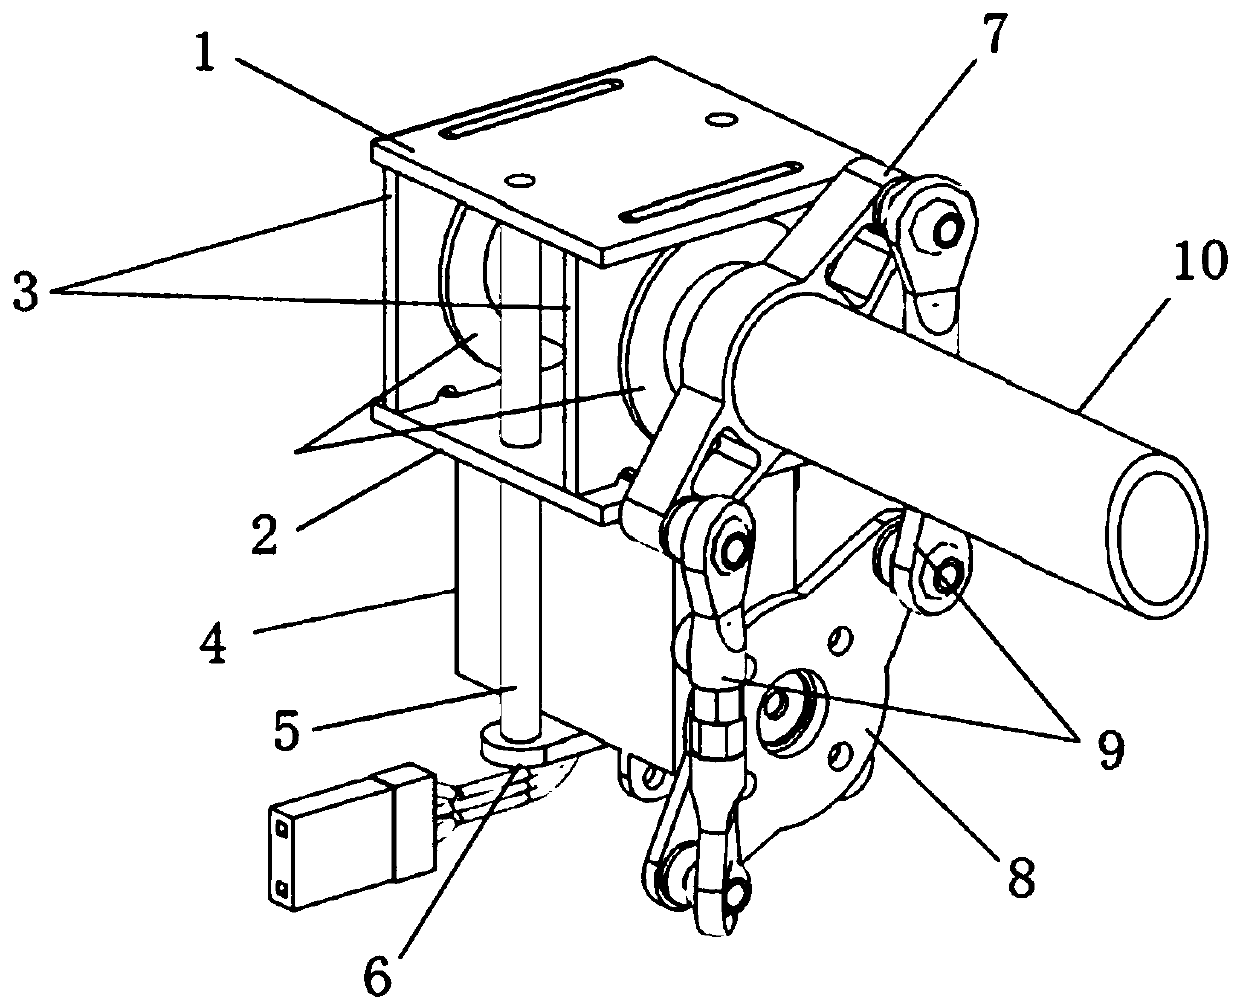 Rotor tilting device for four-axis unmanned aerial vehicle